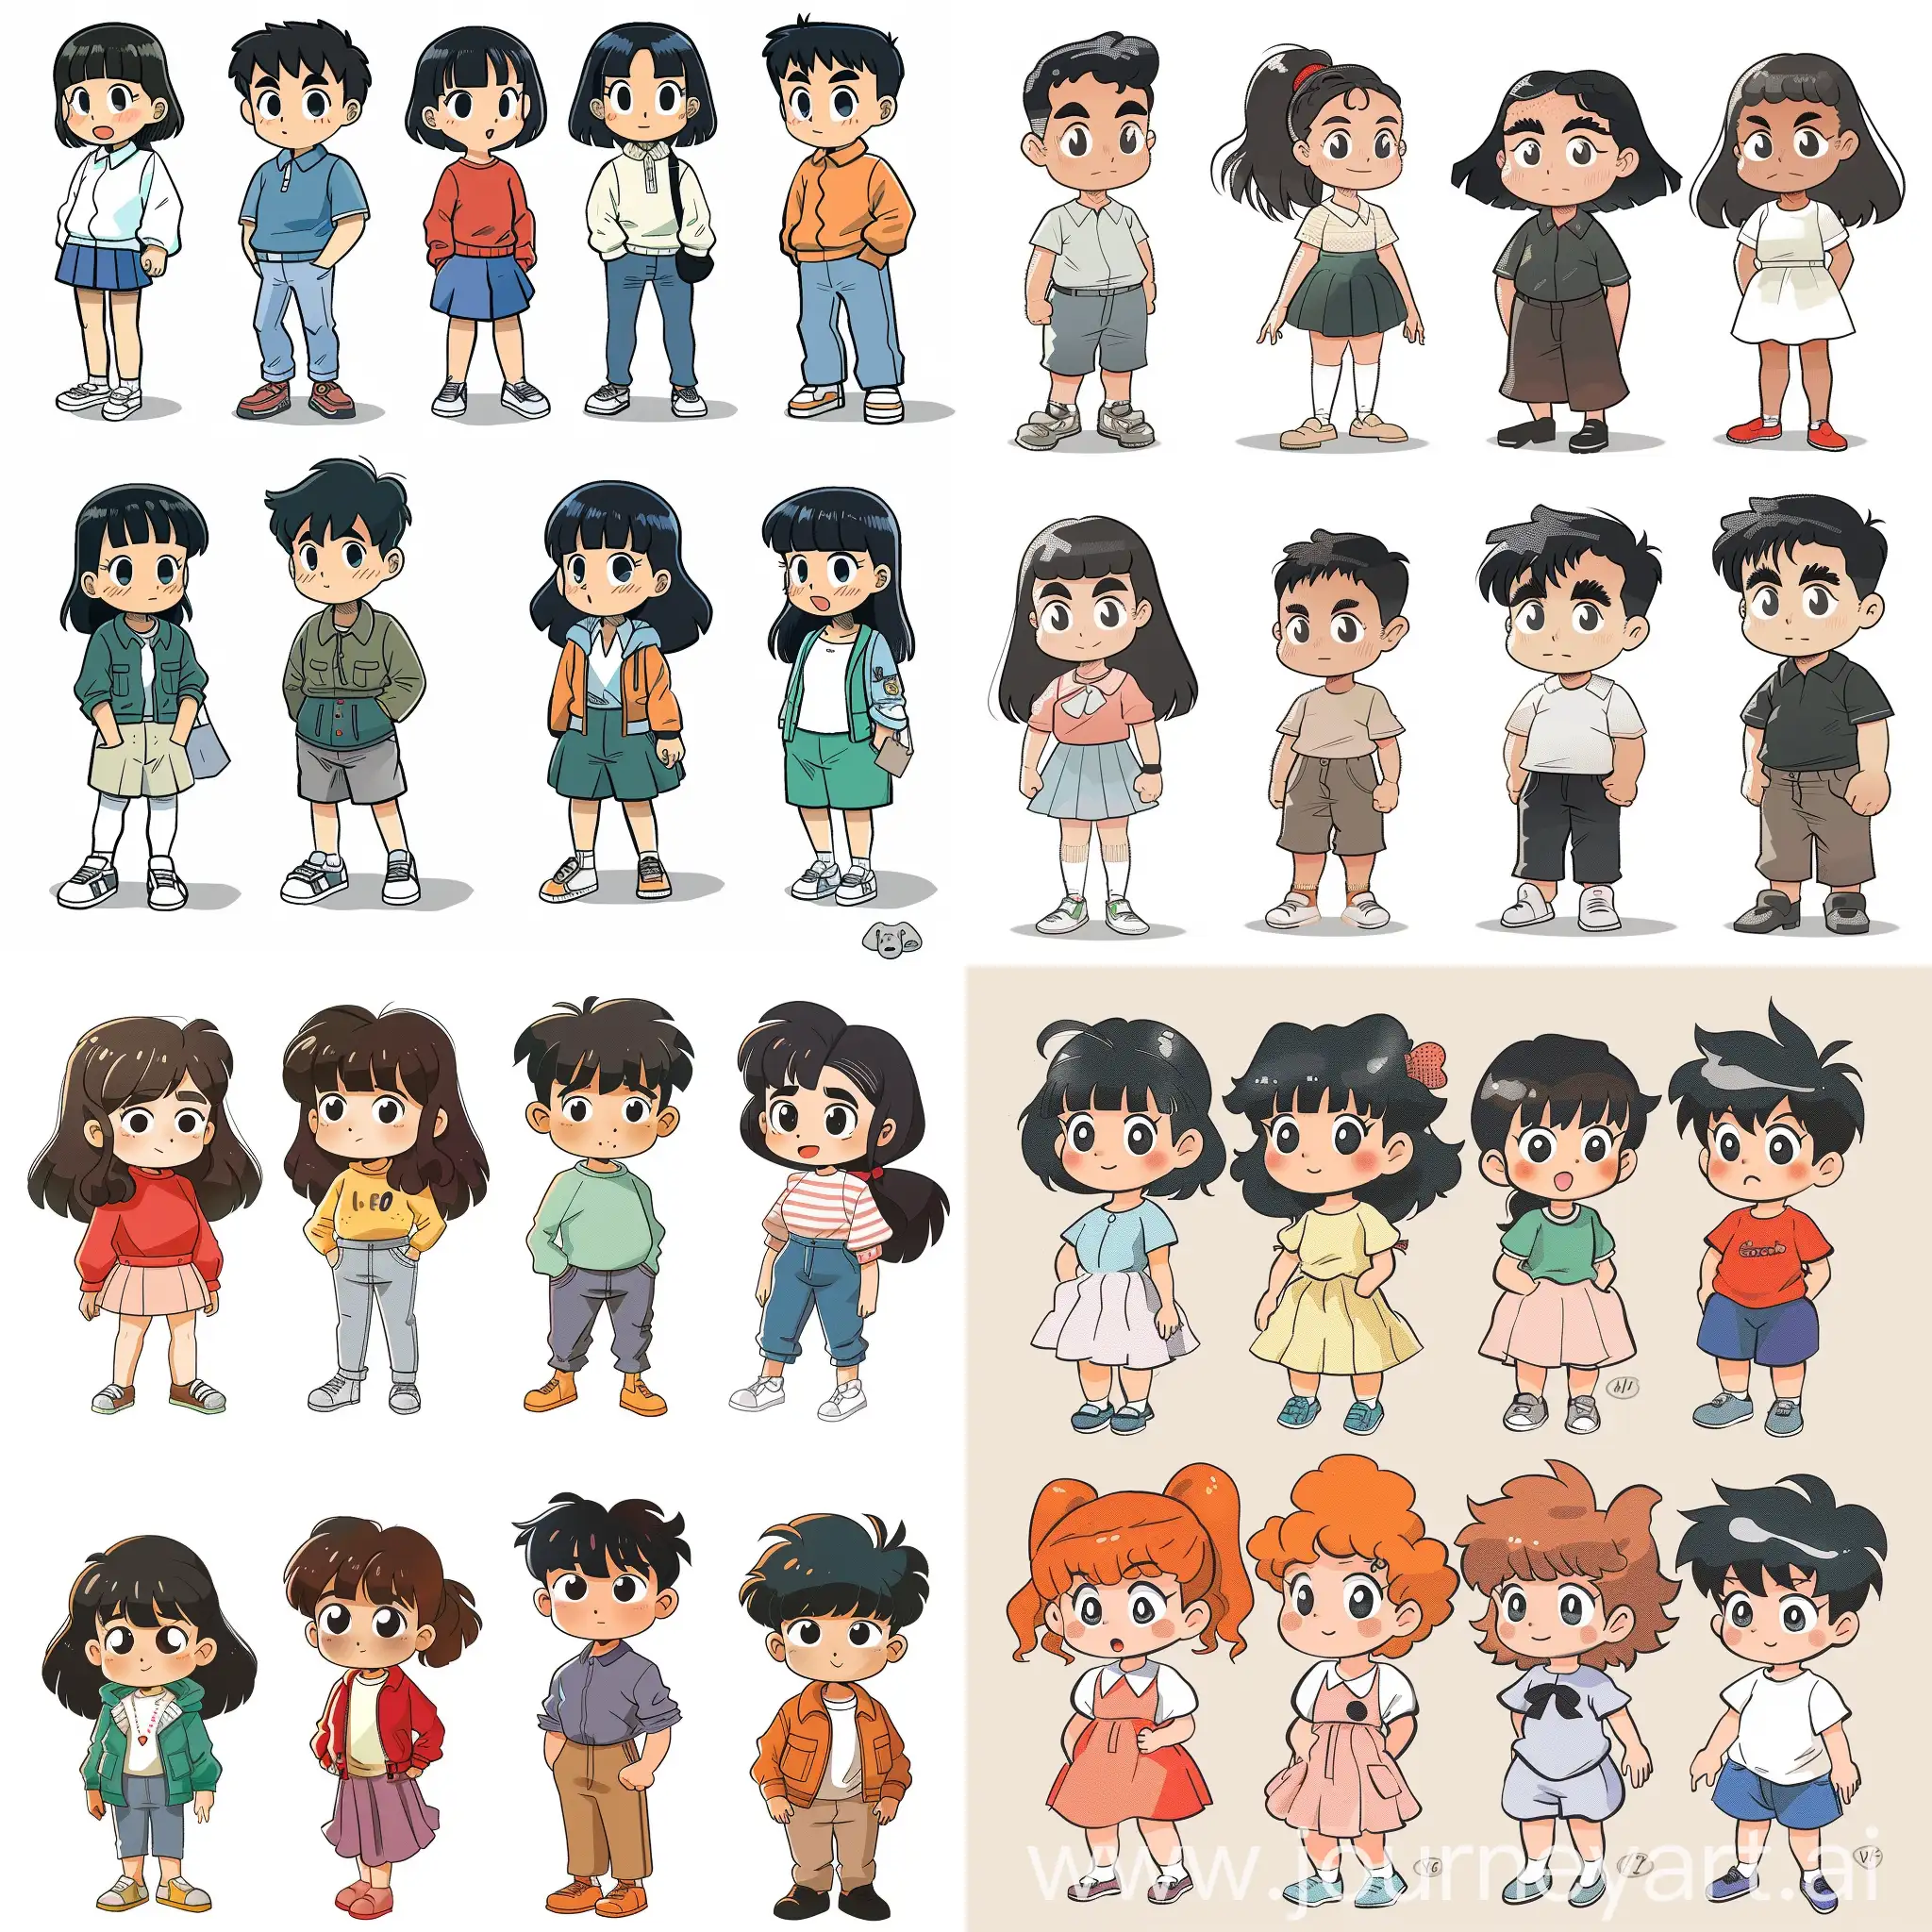 Help me design 8 anime cartoon images together, similar to Crayon Shin-chan kind of style. five female and three male, all not too old.